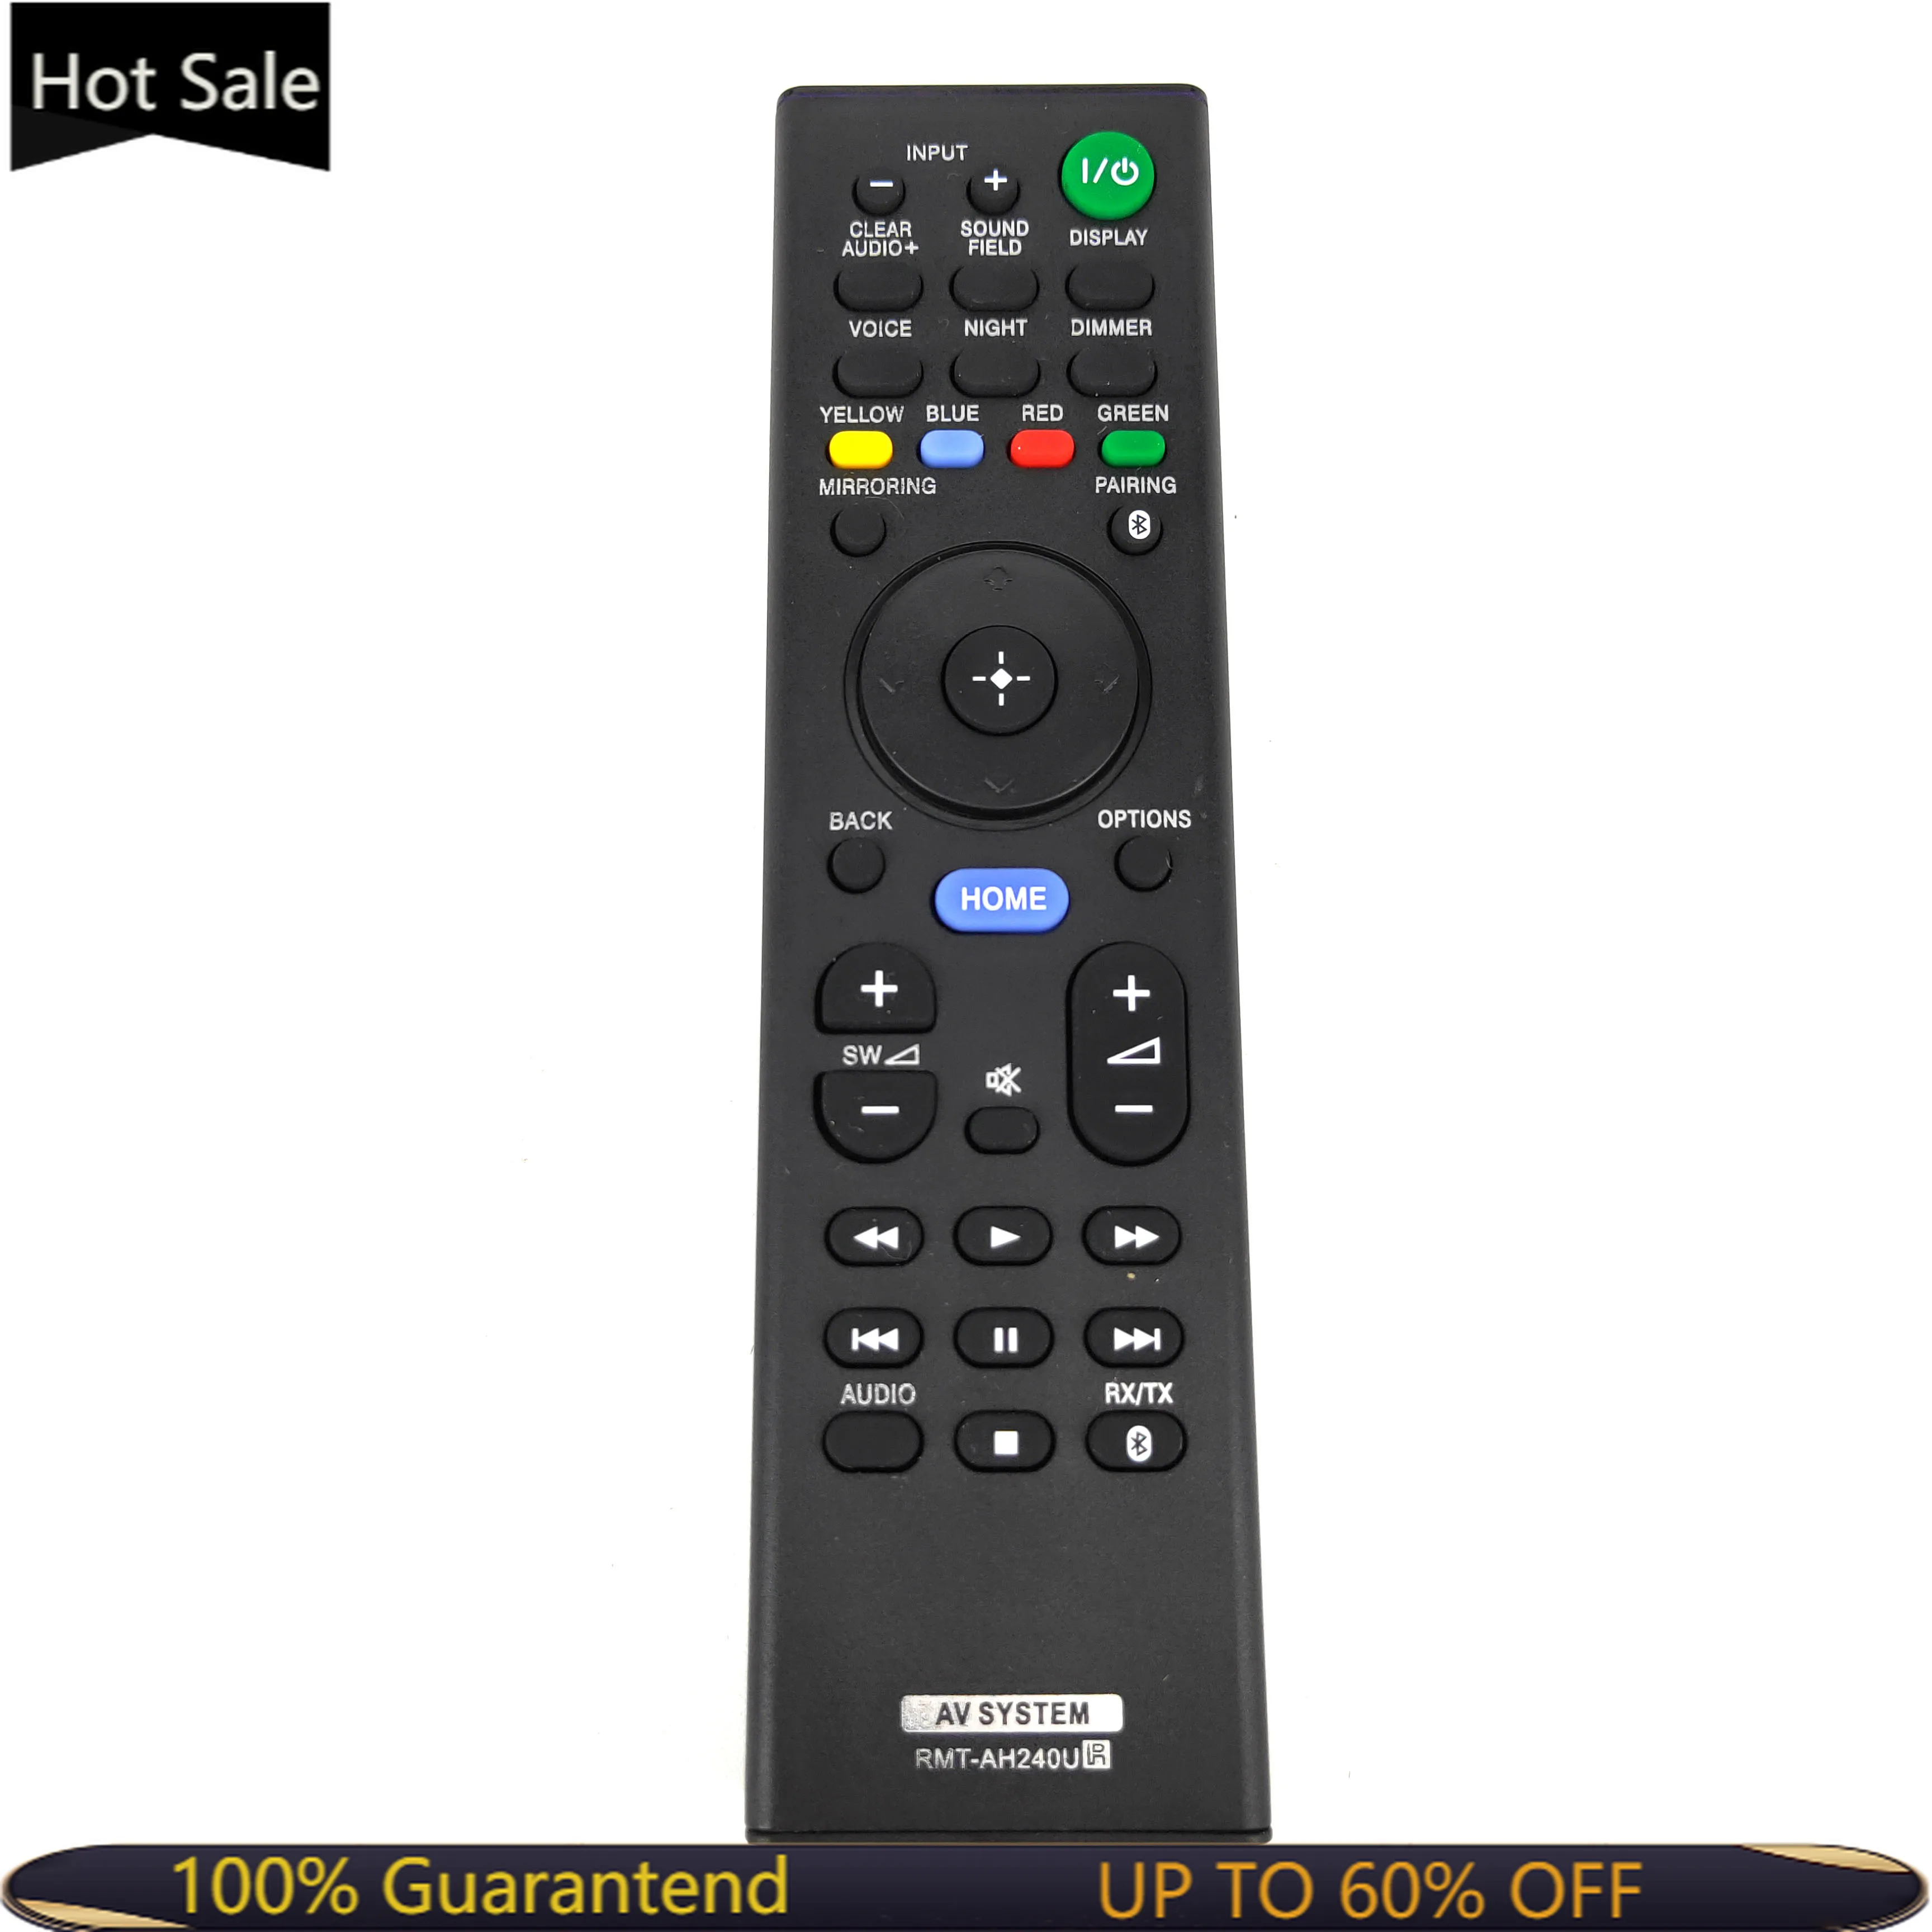 

NEW RMT-AH240U Replacement For SONY AV System Remote Control For HT-CT790 HT-NT5 HT-XT2 SA-CT790 Fernbedienung